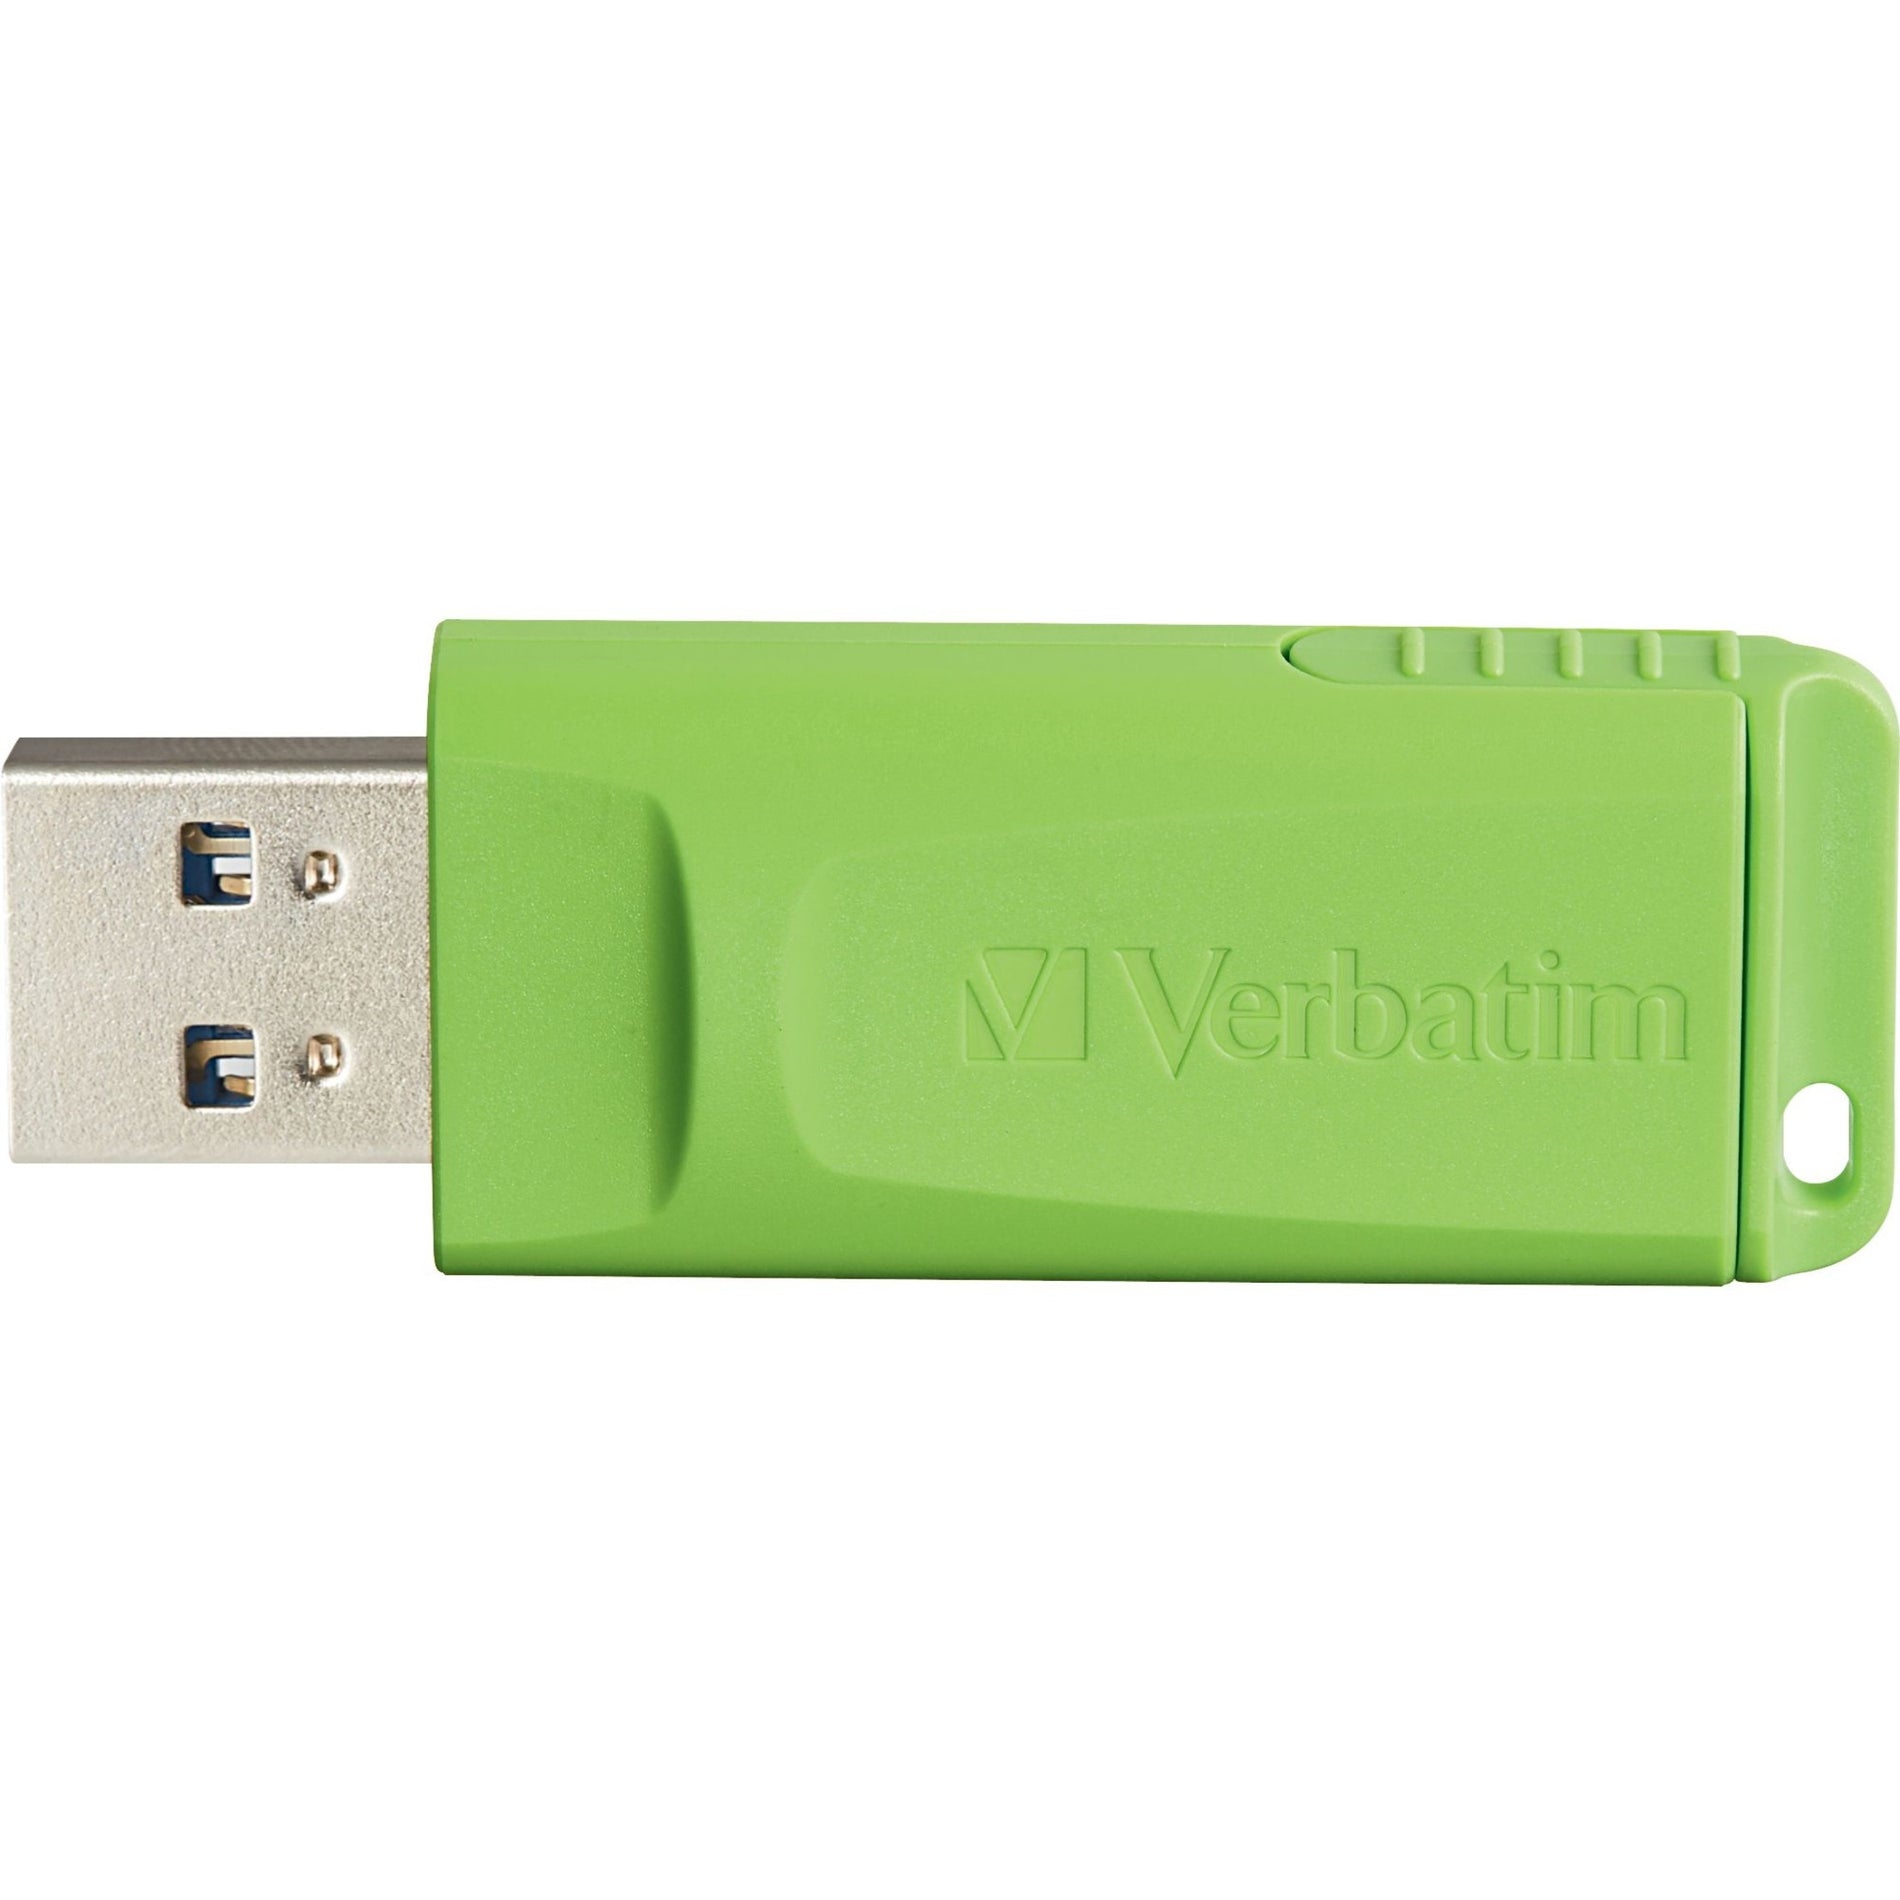 Best Pendrive: 7 Best Pendrives: Get Organized with Stylish Pendrives for  On-the-Go Storage - The Economic Times